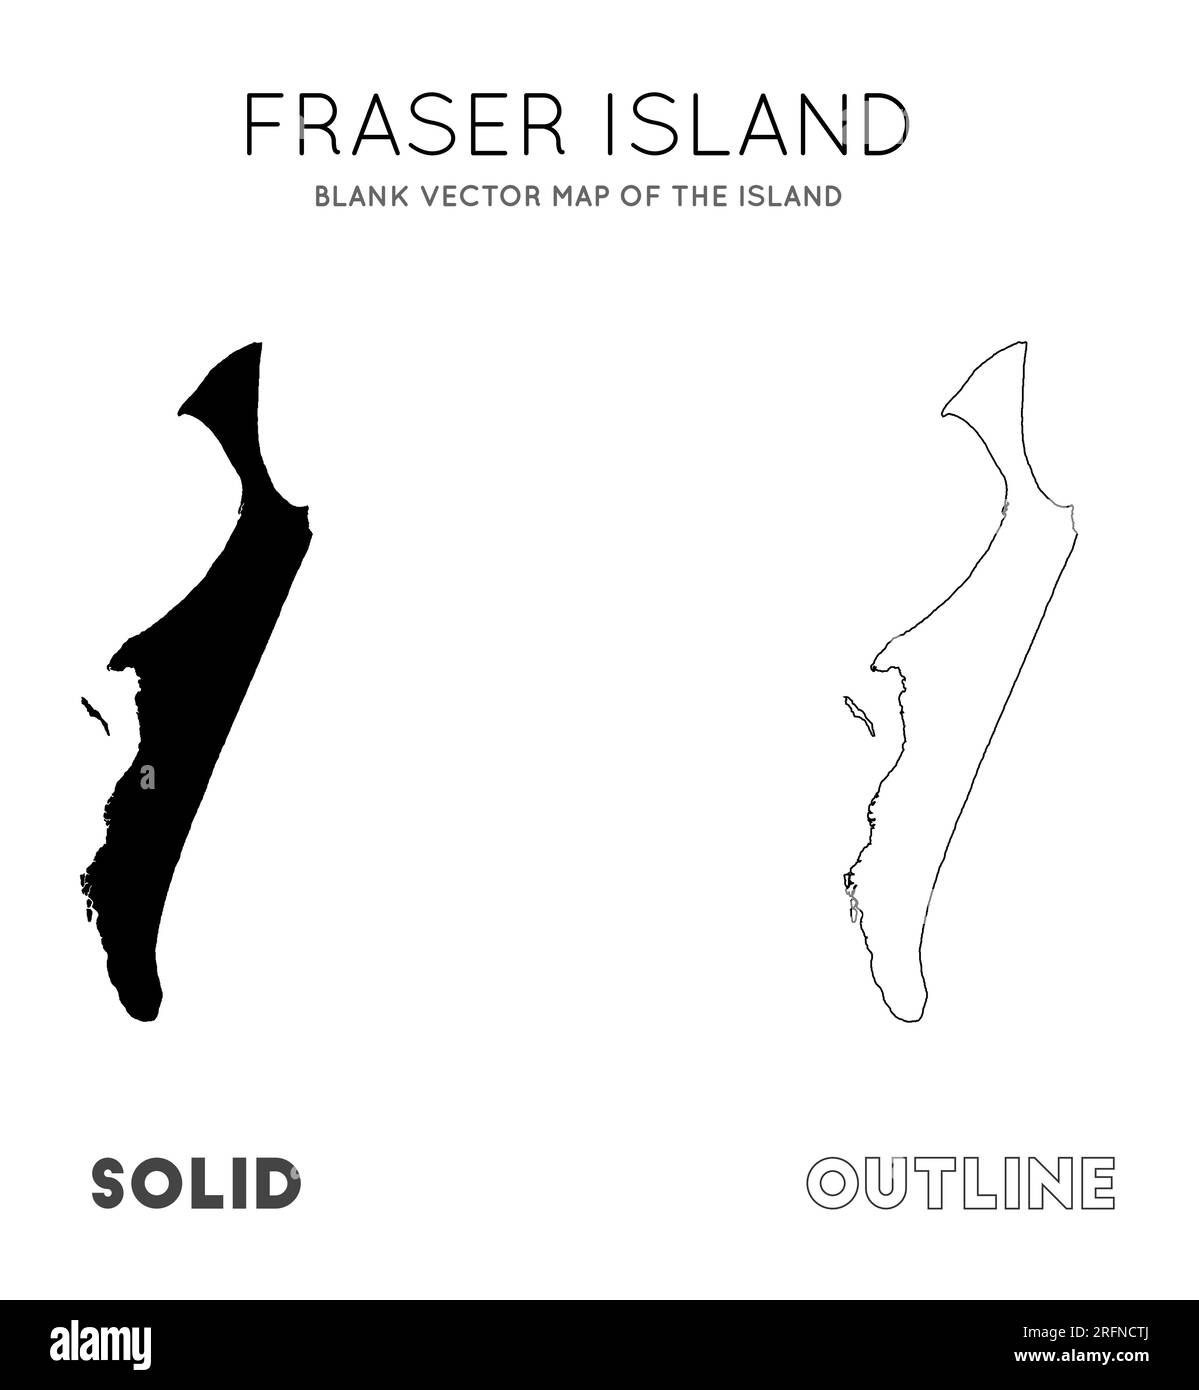 Fraser Island map. Borders of Fraser Island for your infographic. Vector illustration. Stock Vector